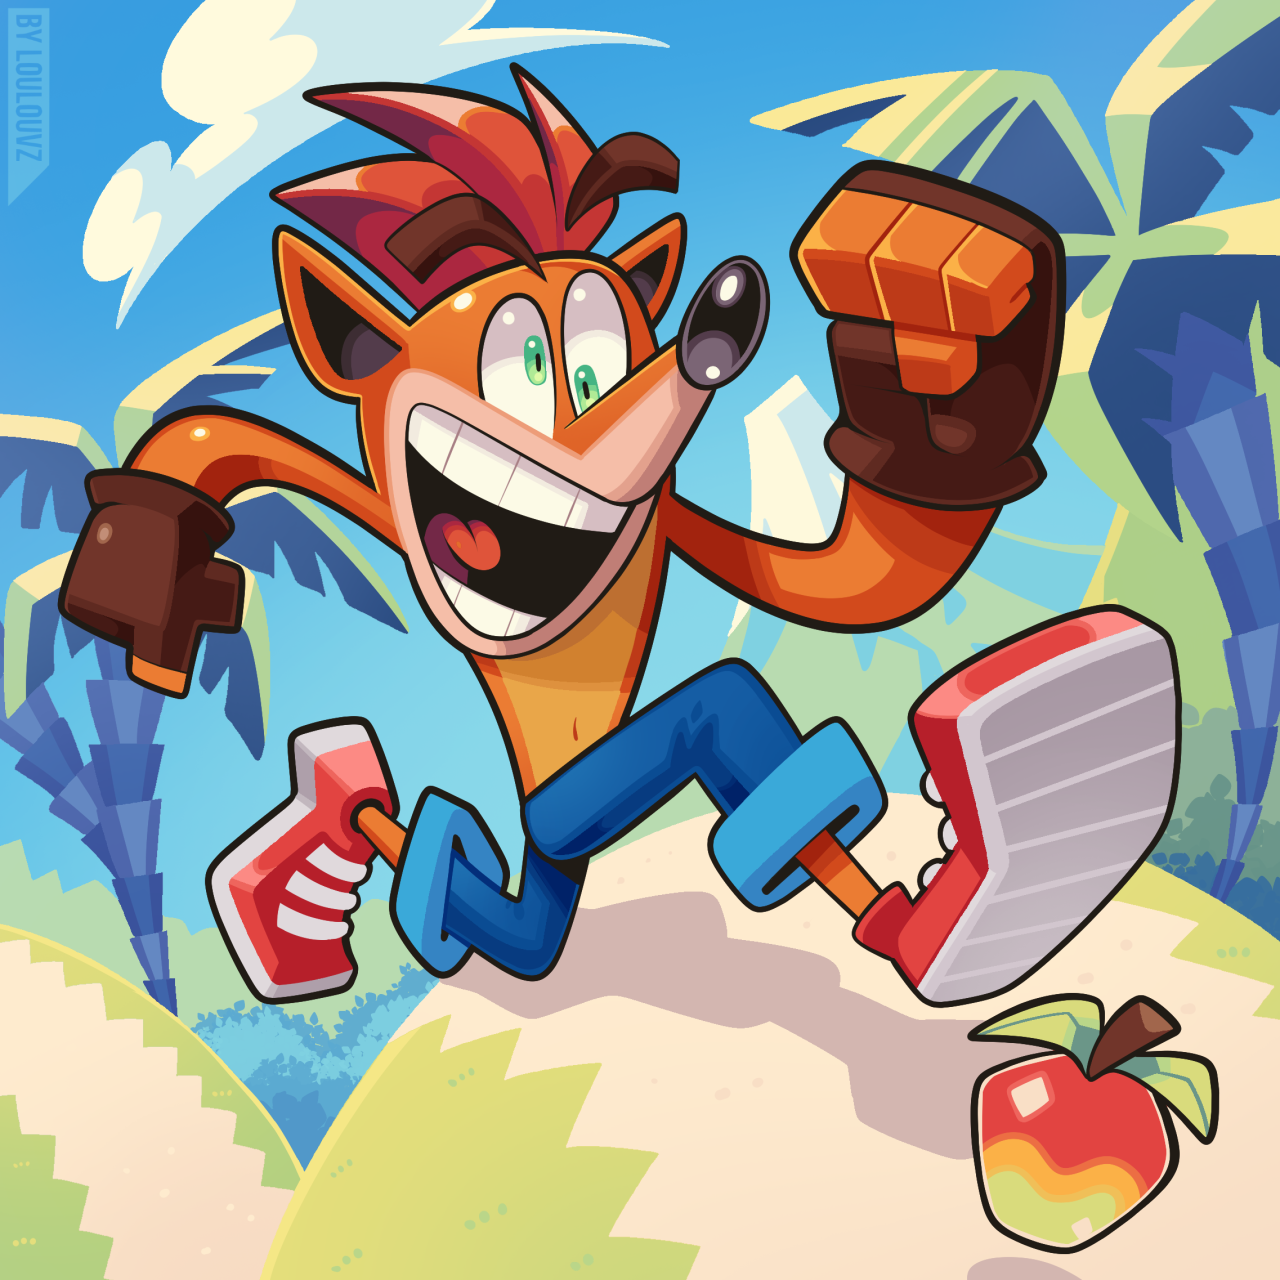 spaicy-project:
“Crash Bandicoot Fanart 2023❤️ Support and follow my art here: https://linktr.ee/spaicy
Posted using PostyBirb
”